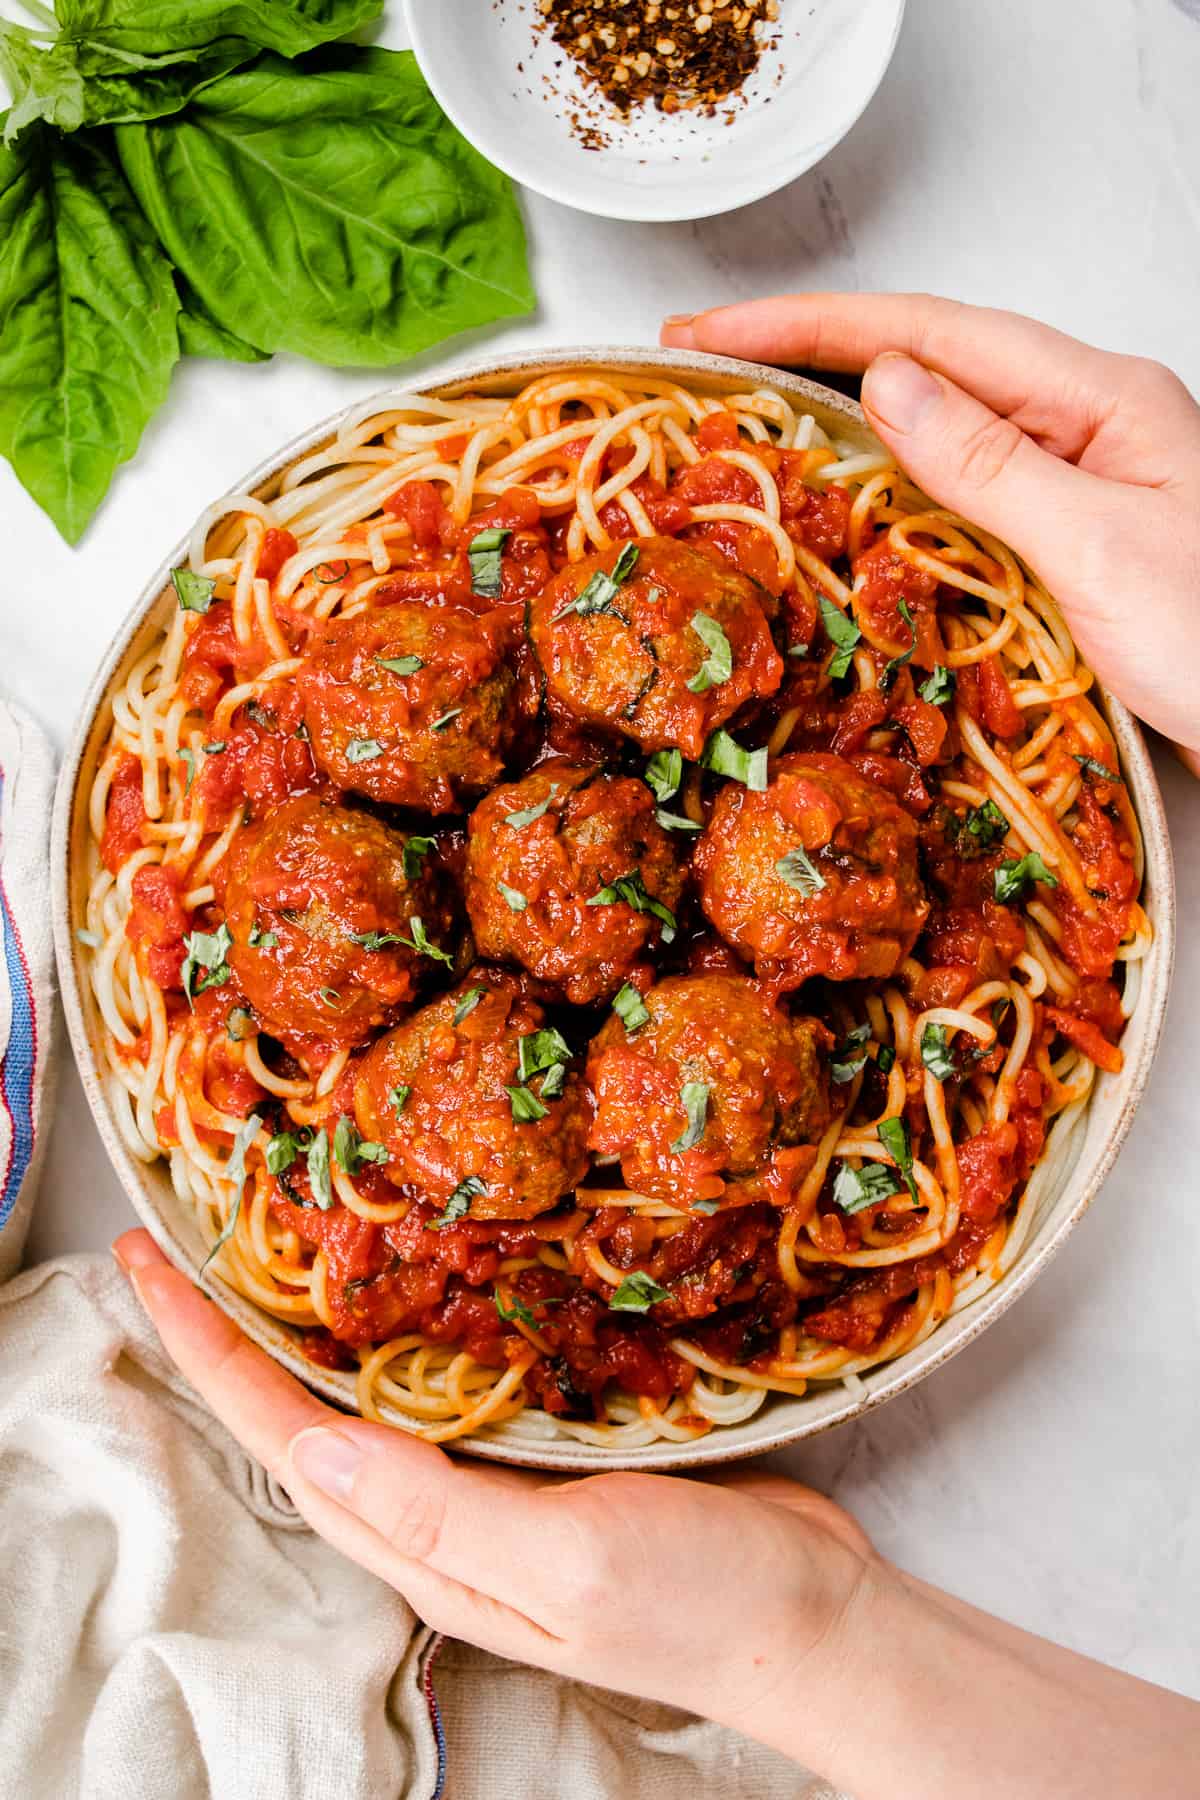 meatballs mixed with marinara sauce on top of the spaghetti are served on a plate.